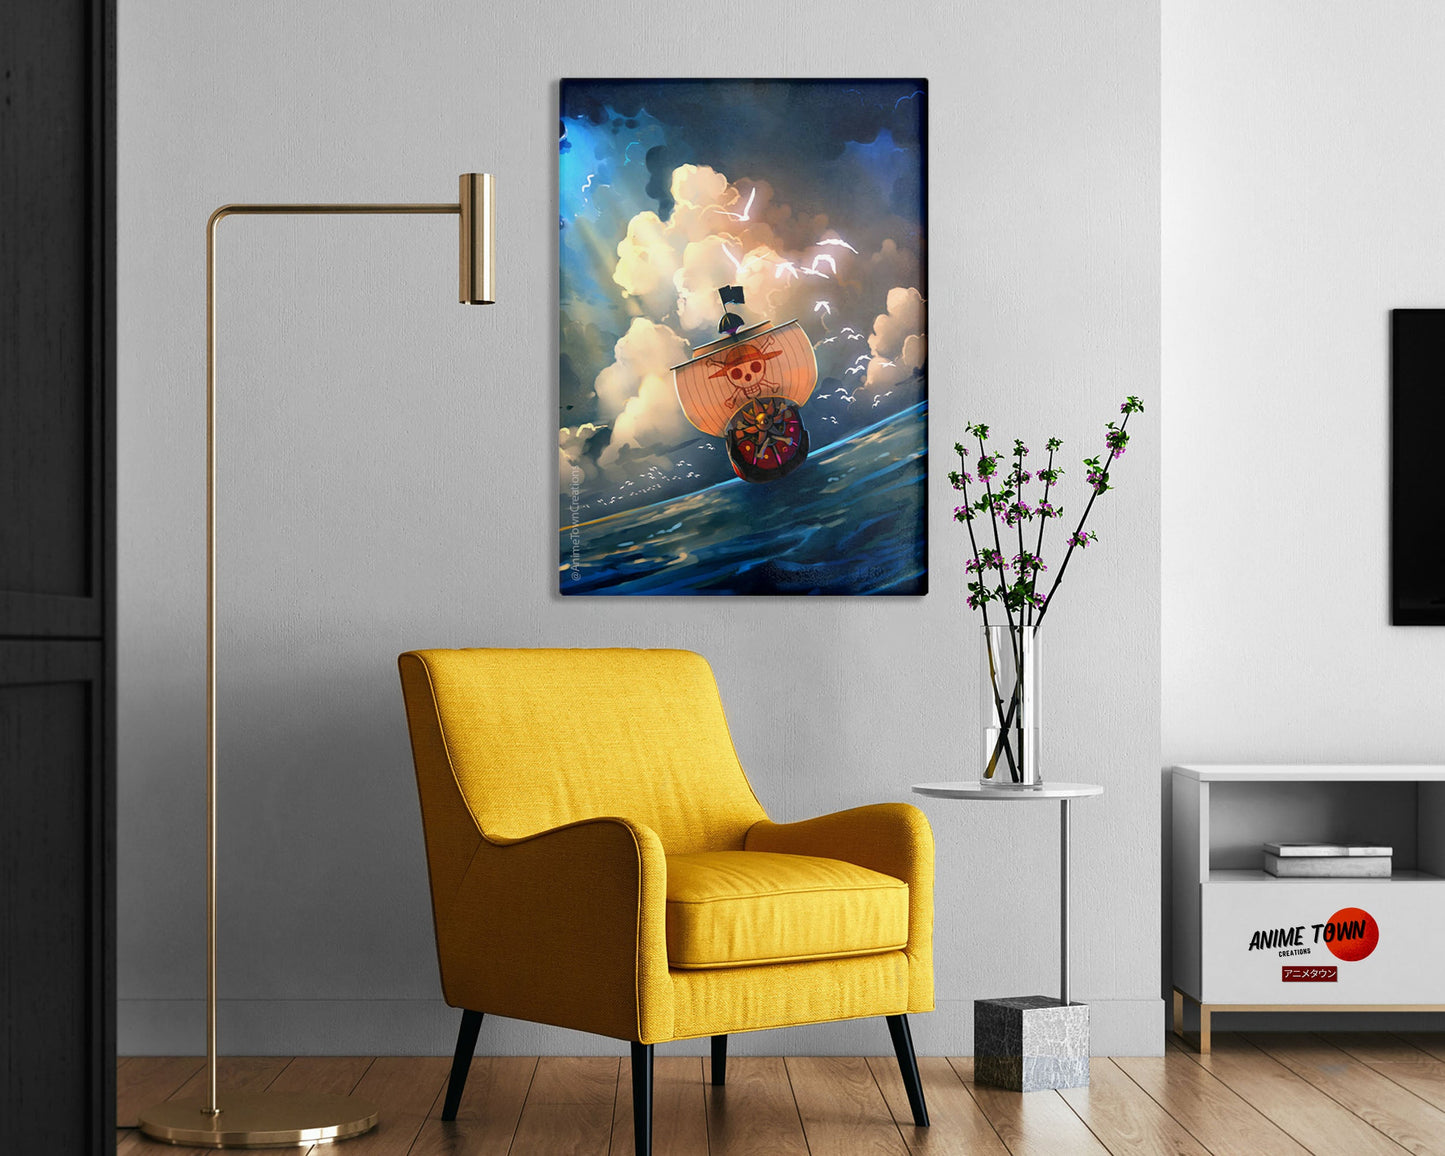 Anime Town Creations Metal Poster One Piece Thousand Sunny 24" x 36" Home Goods - Anime One Piece Metal Poster